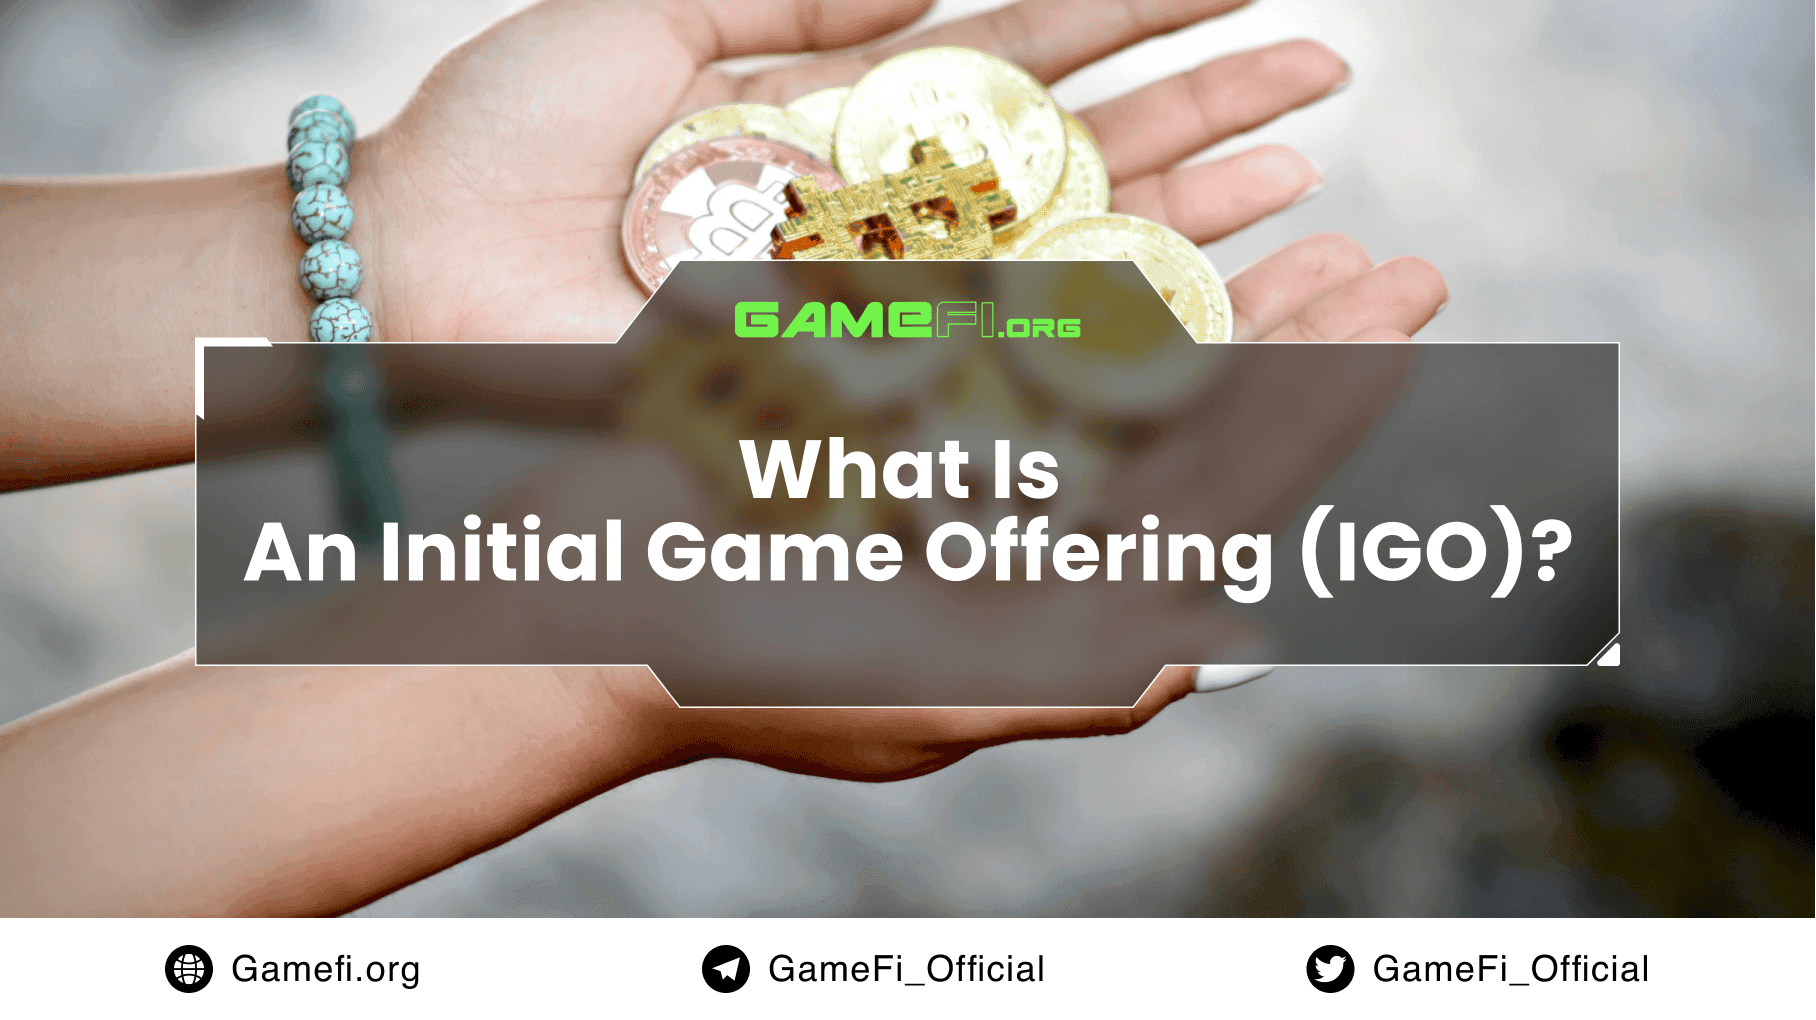 What Is An Initial Game Offering (IGO)?